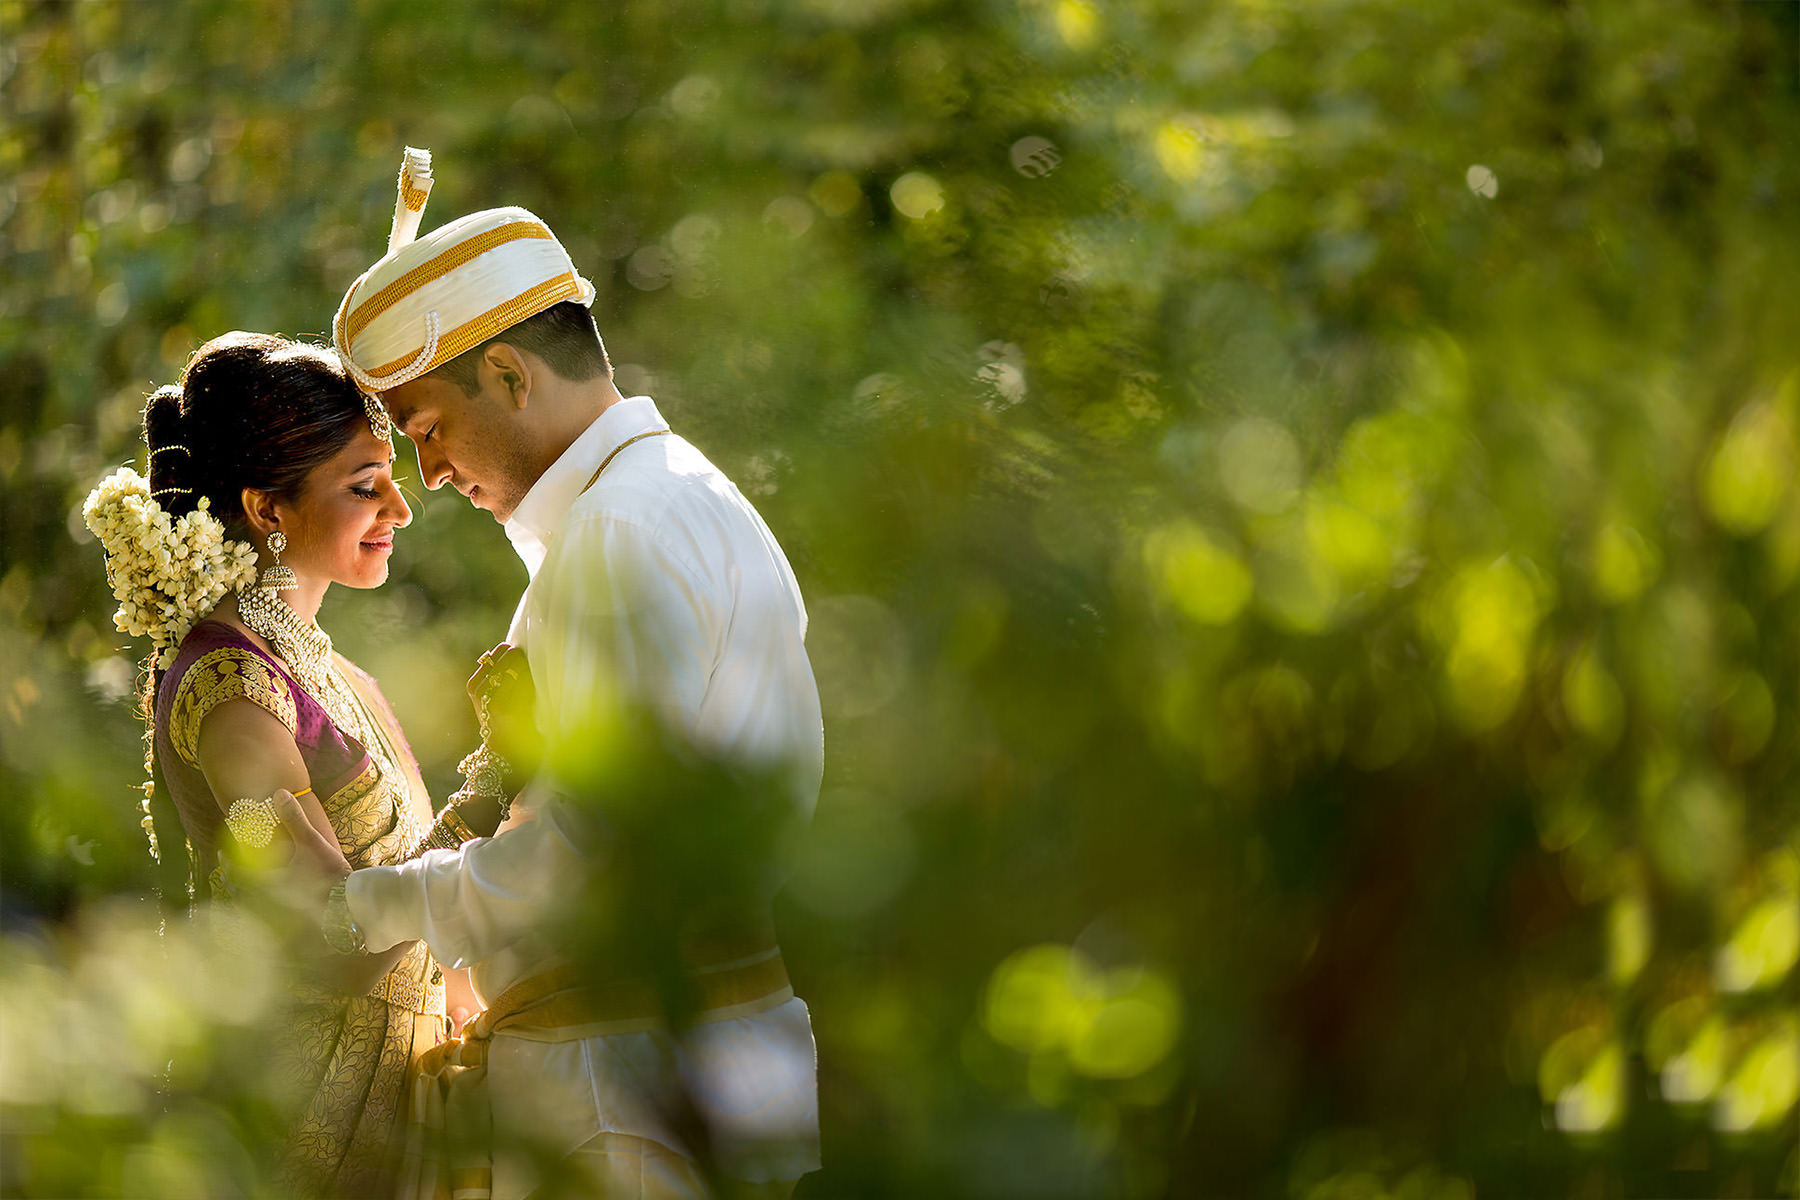 How Can I Choose The Right Wedding Photographer For My Wedding?